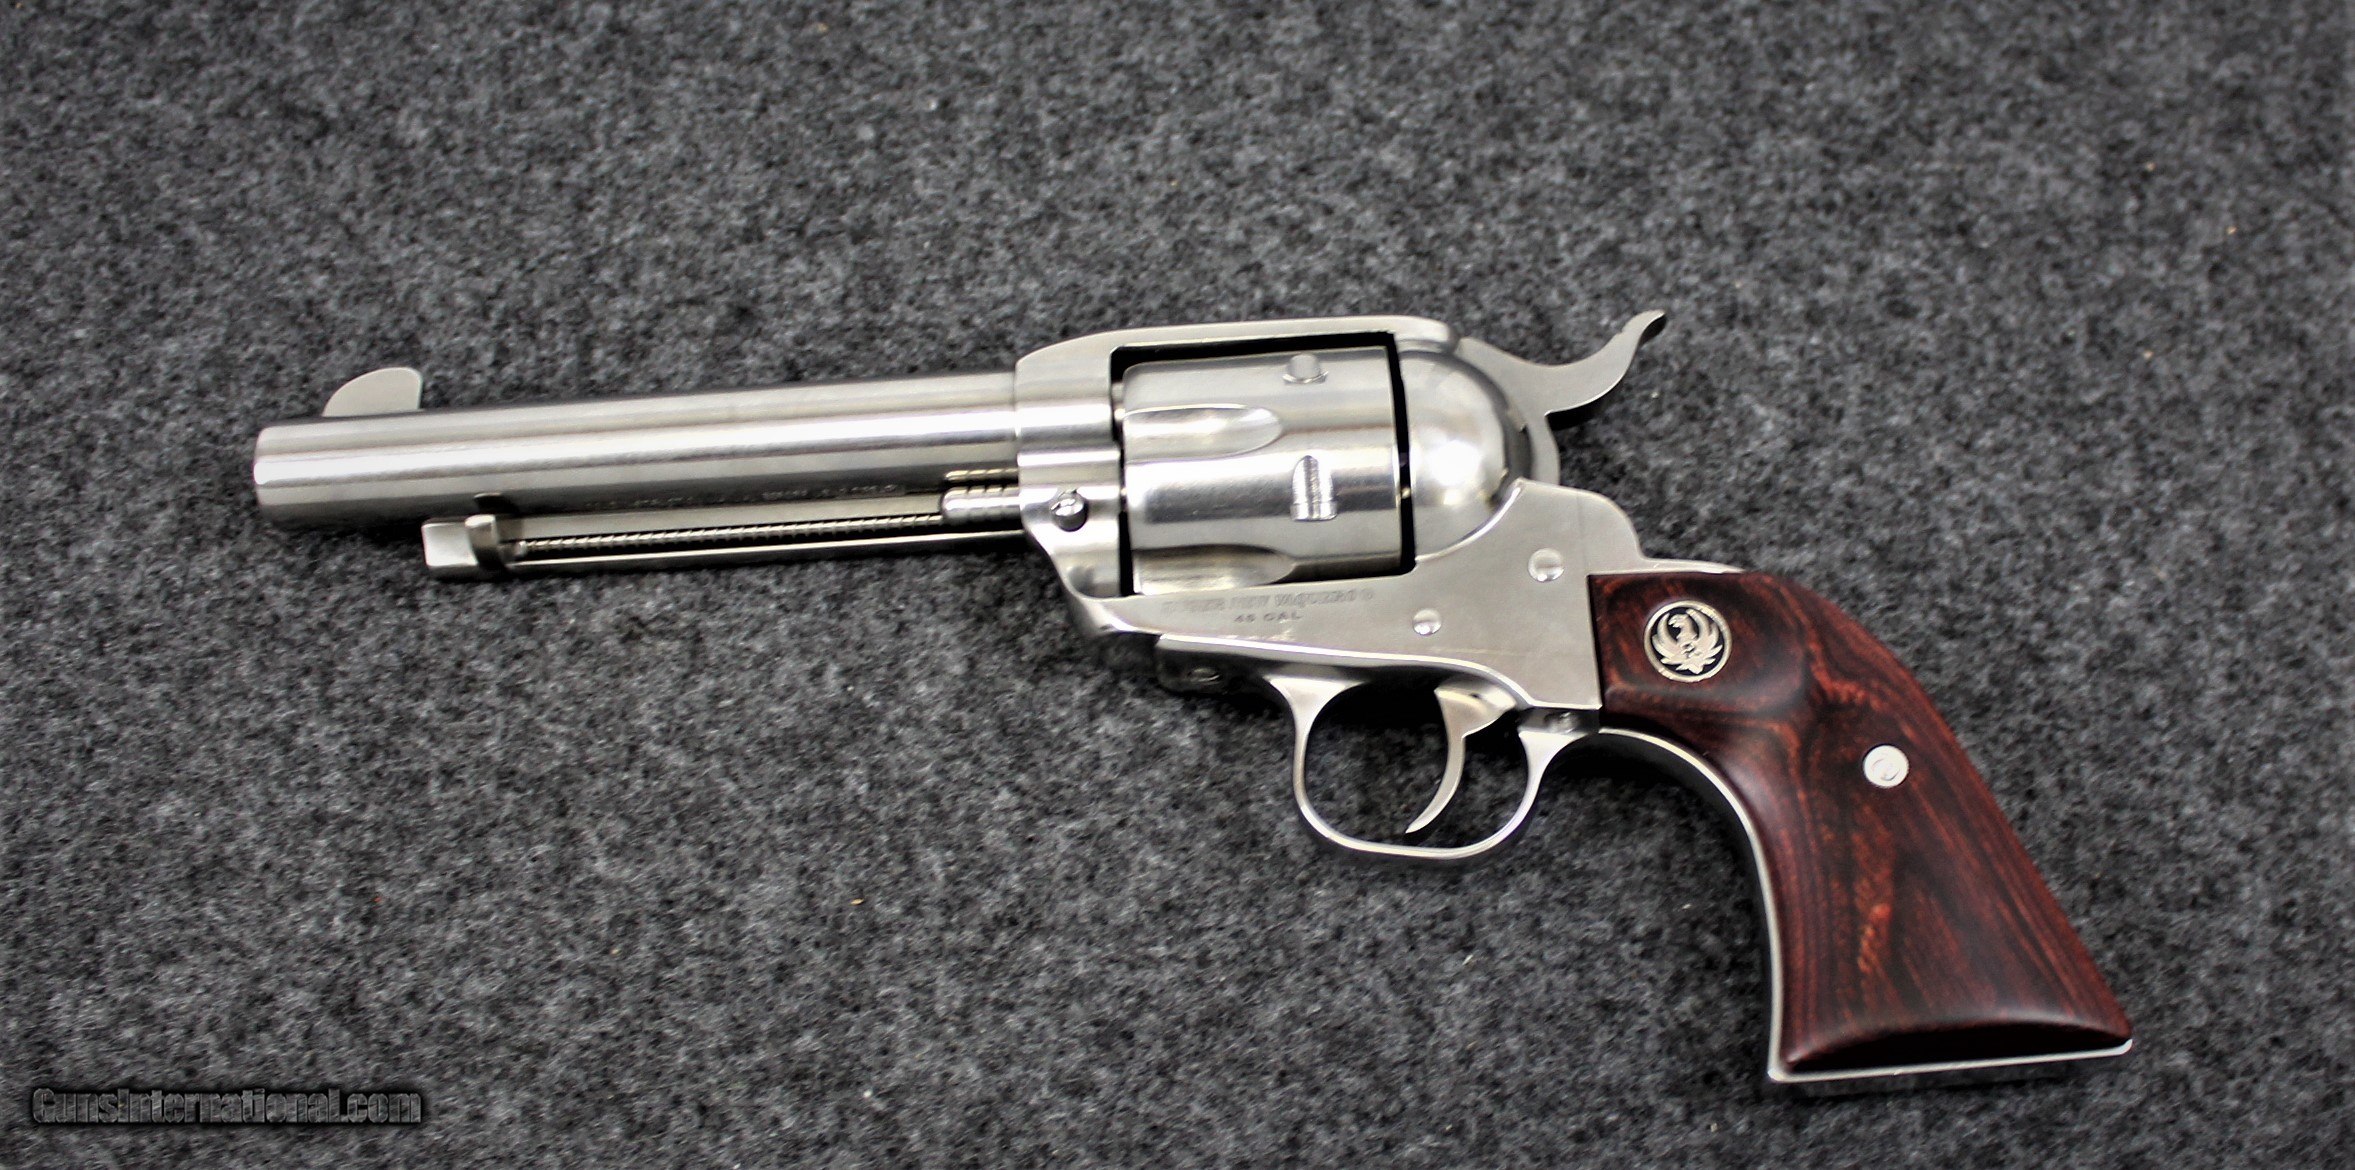 Ruger Vaquero Stainless Finish In Caliber 45 Long Colt